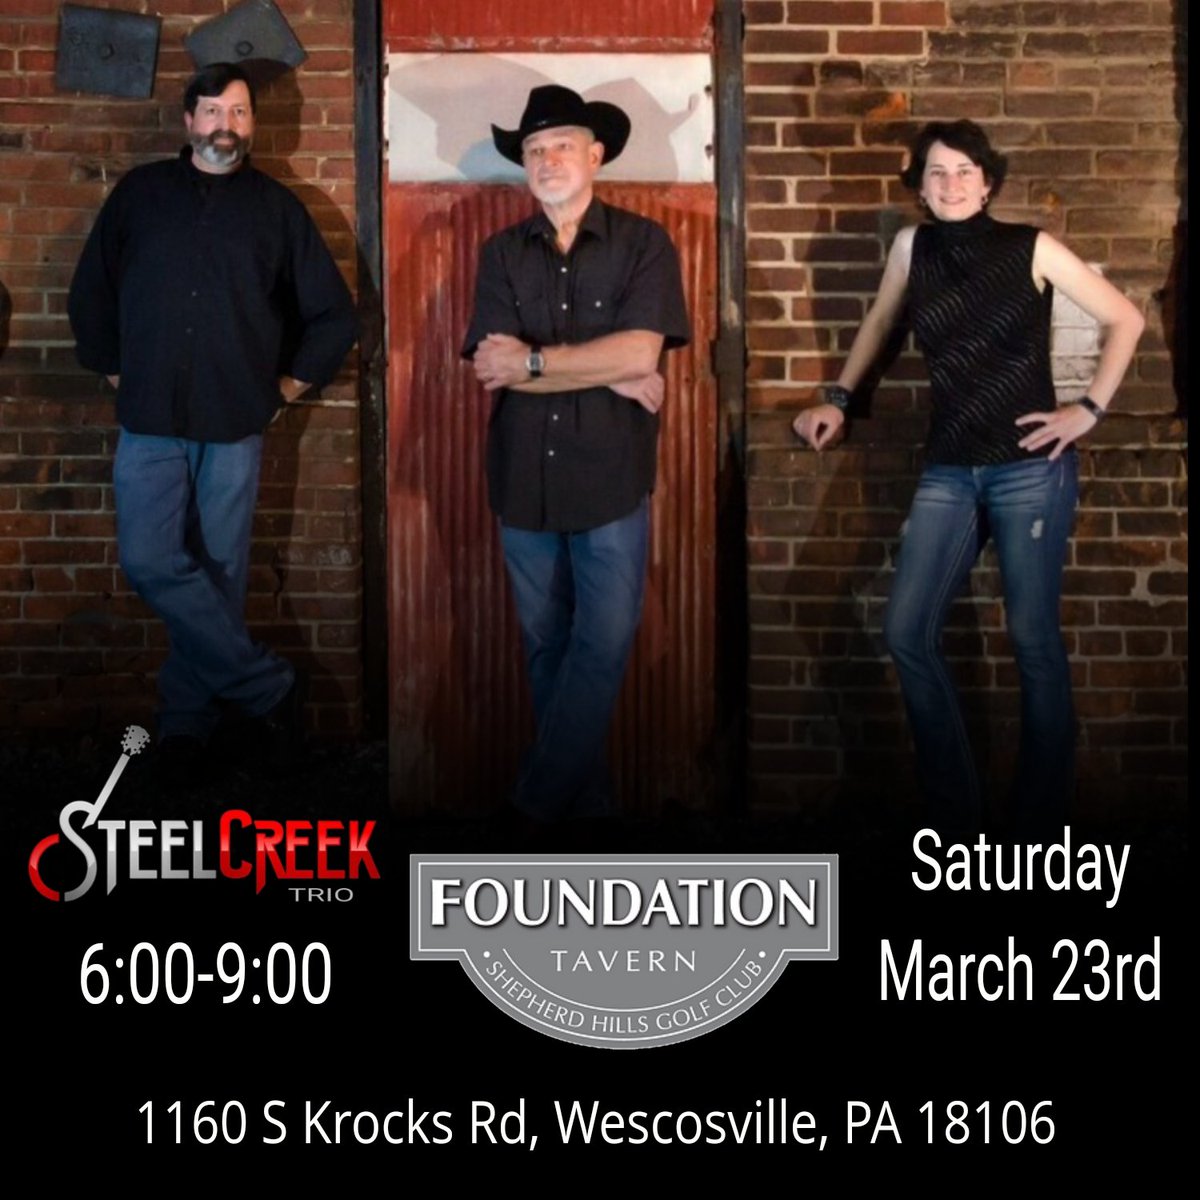 Two acoustic shows this weekend:
#SteelCreekTrio #JeniHackettMusic #acousticmusic #LiveMusic